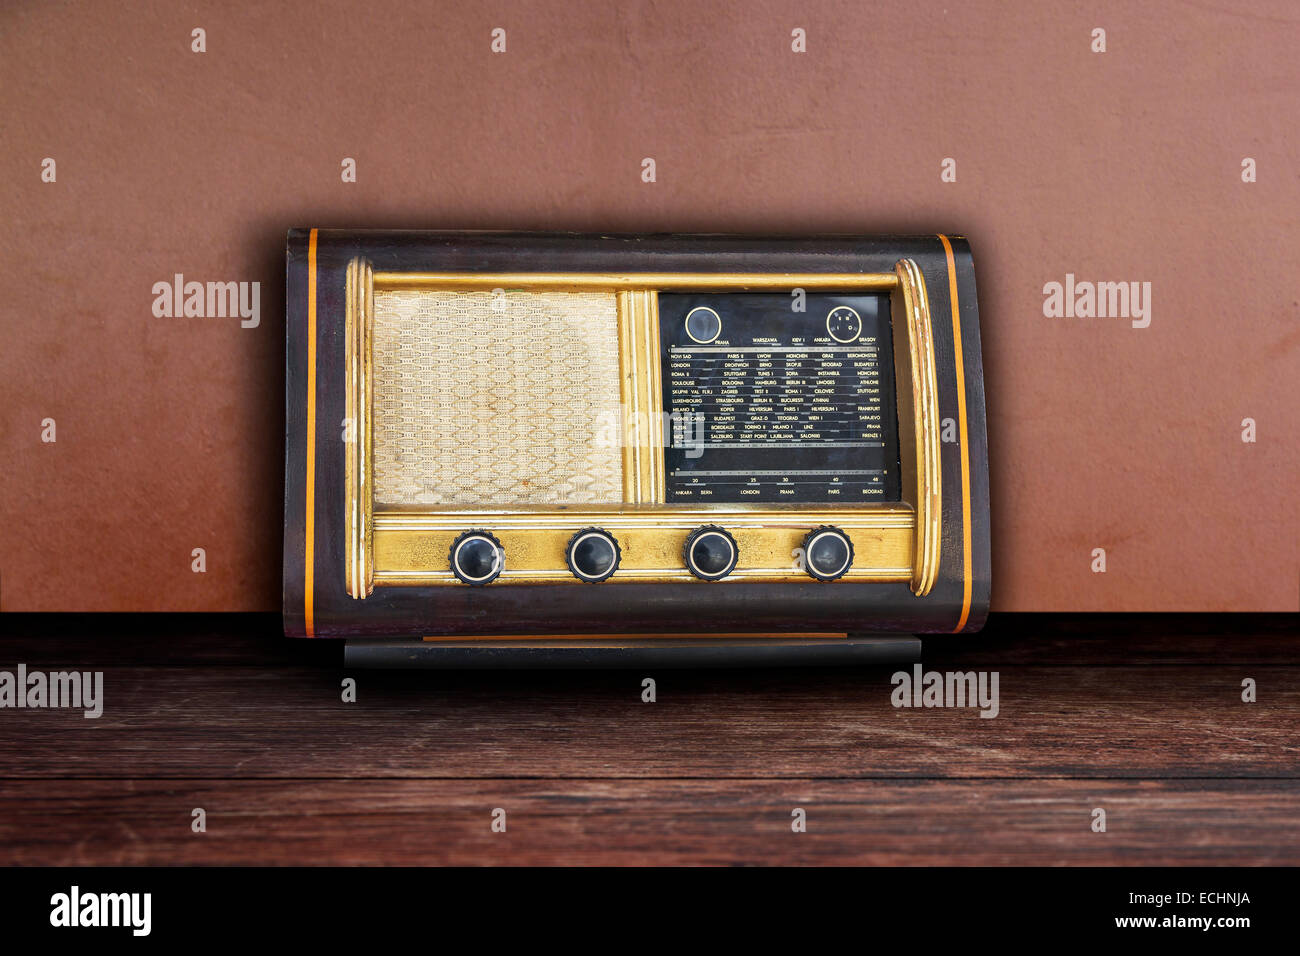 Old retro fashioned radio on wooden table and wall background Stock Photo